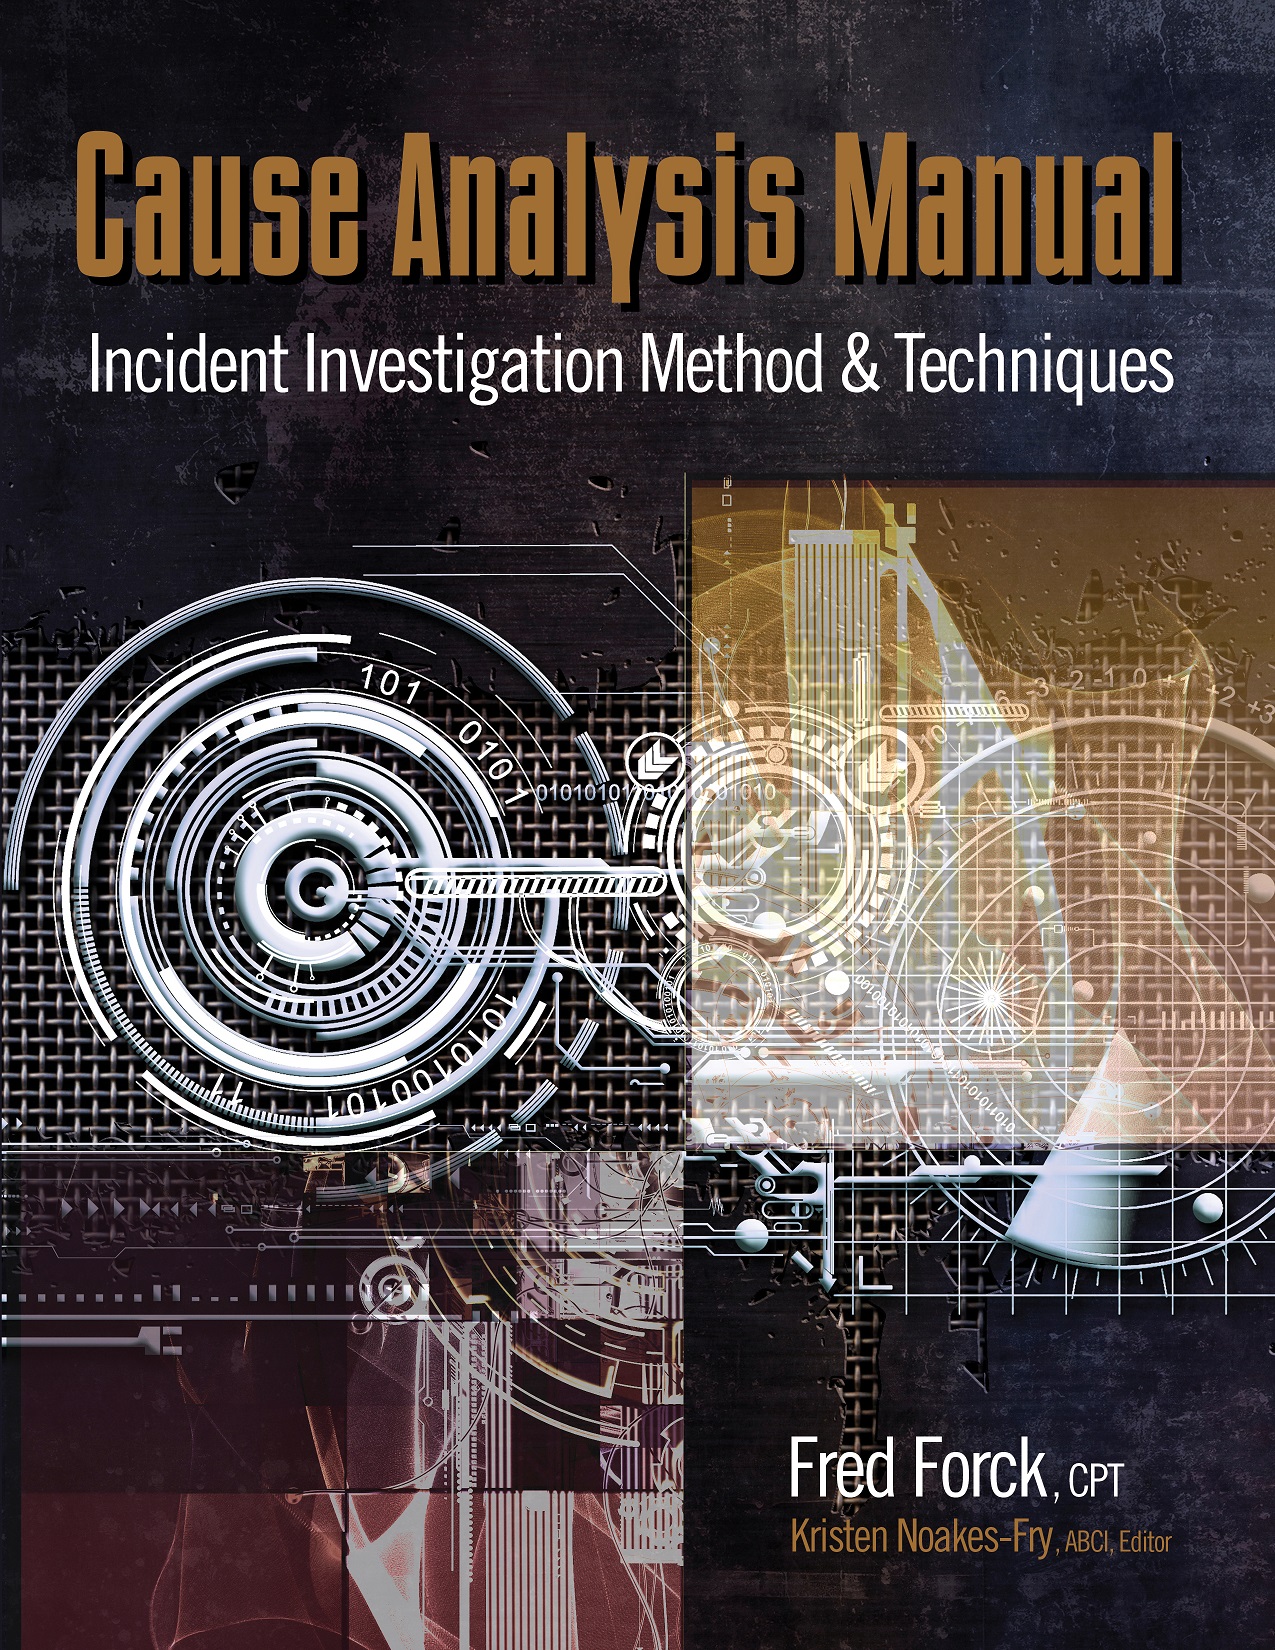 cause-analysis-manual-incident-investigation-method-techniques-fred-forck-rothstein-publishing